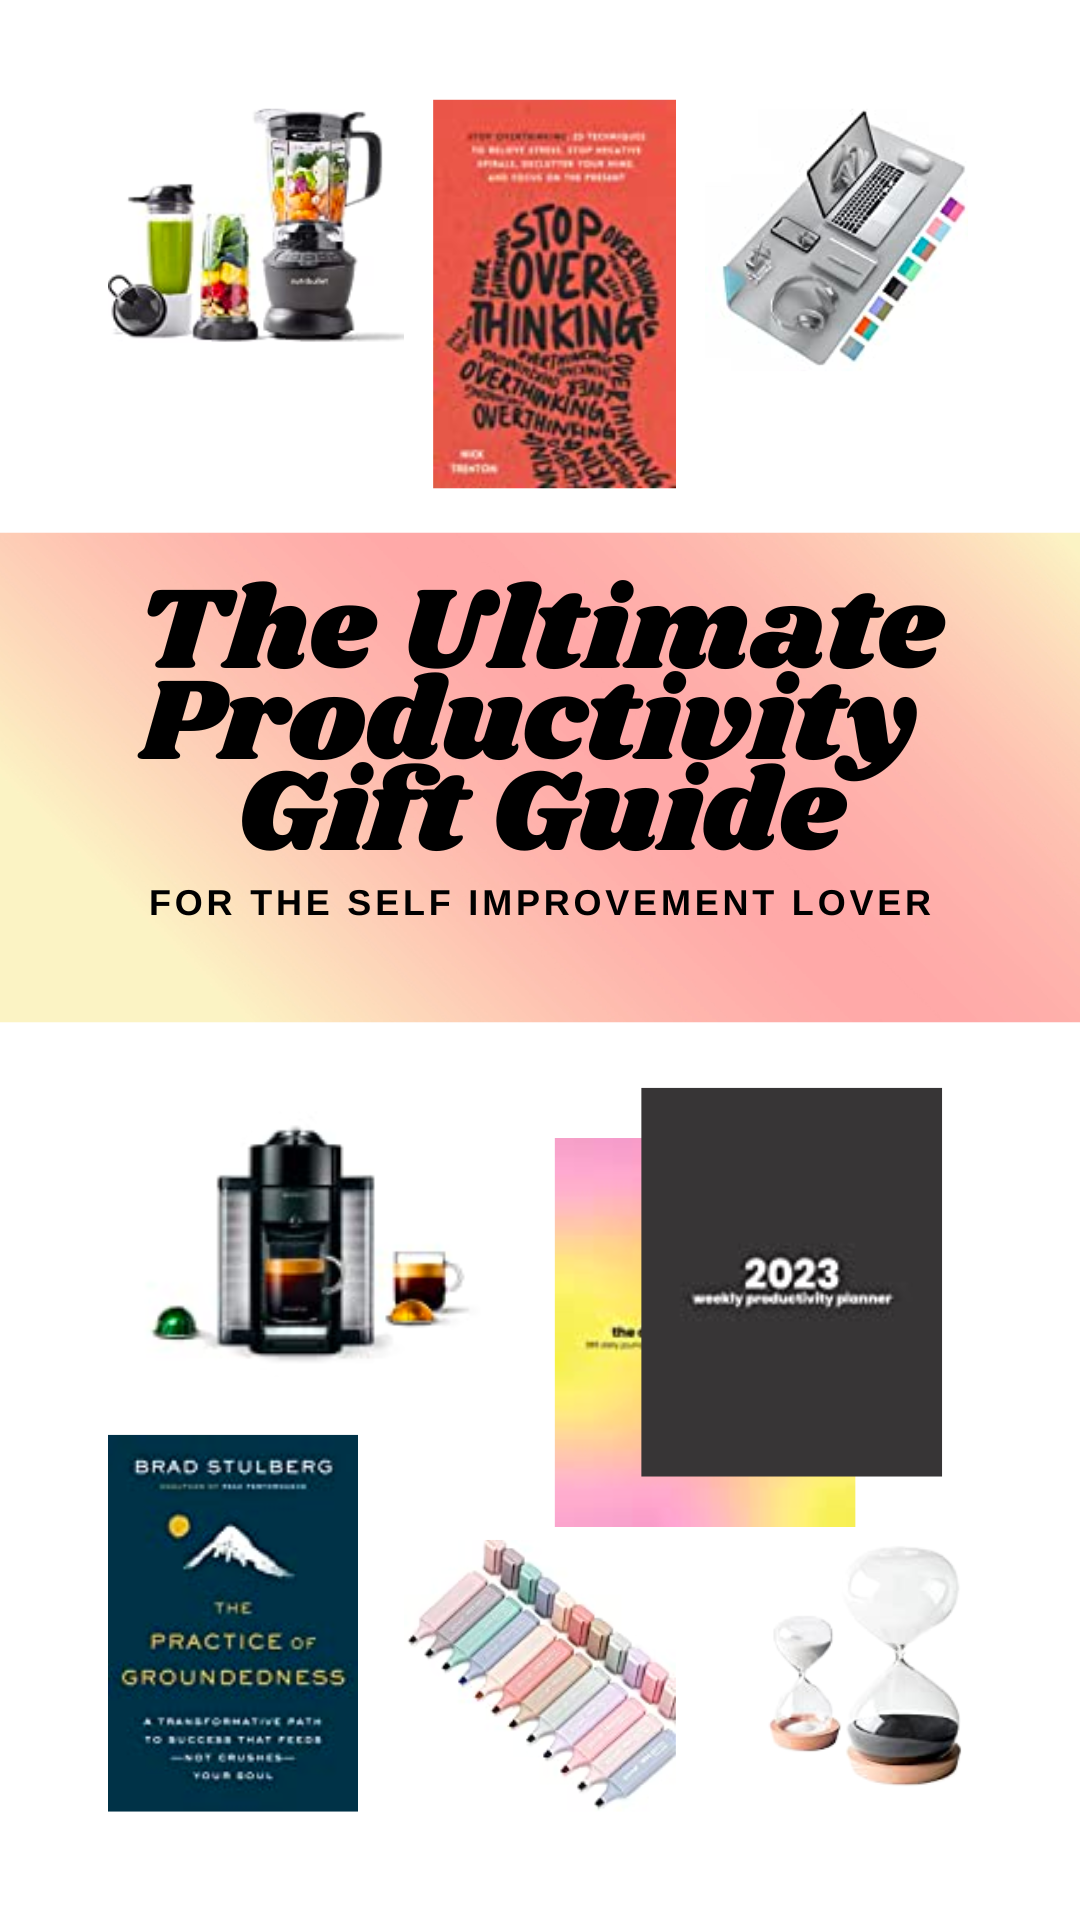 PRODUCTIVITY GIFT GUIDE BEST GIFTS